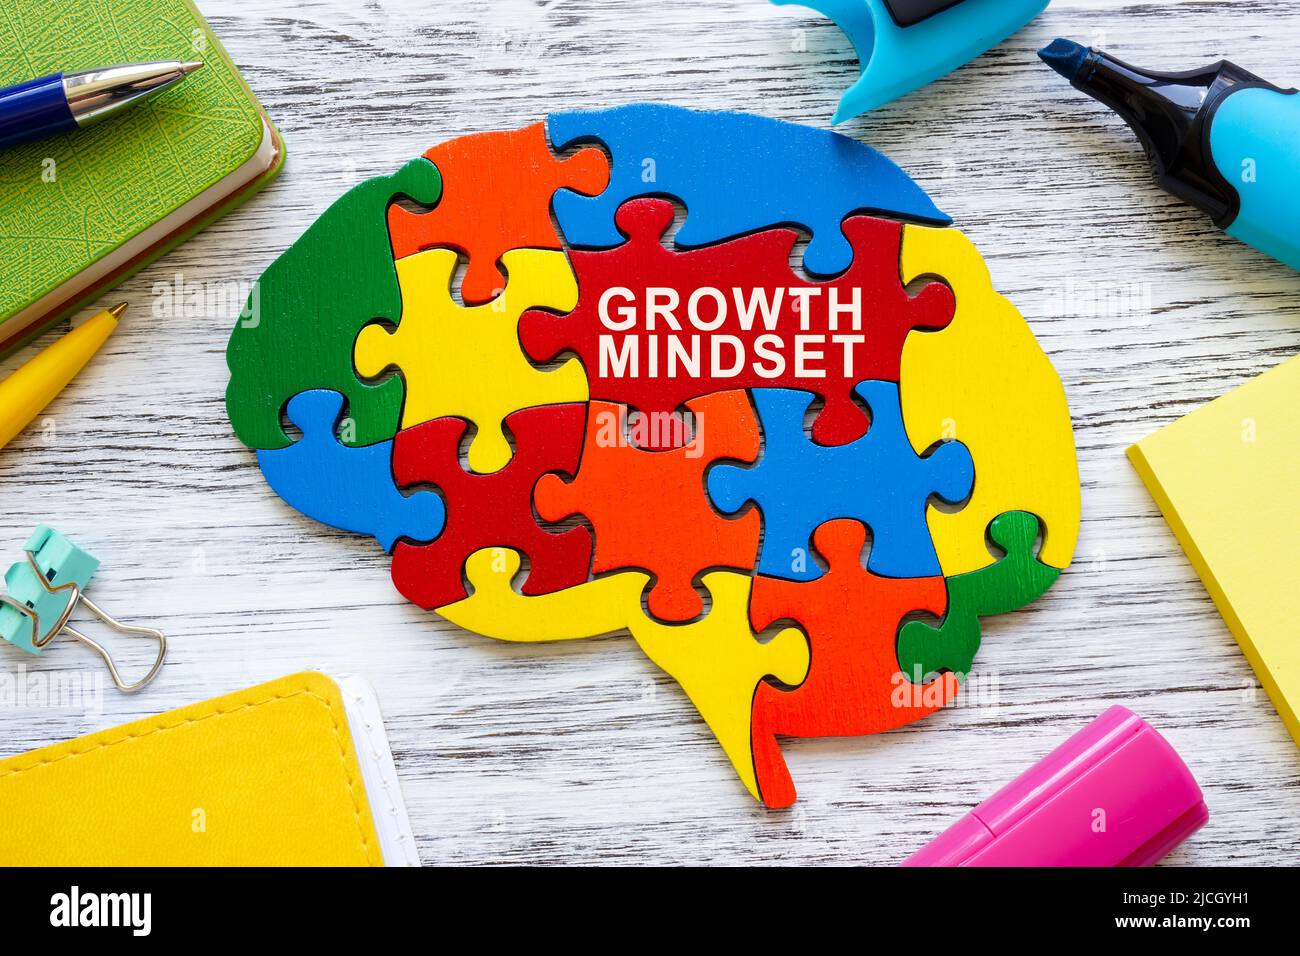 Growth mindset concept. Brain from colored puzzle pieces. Stock Photo